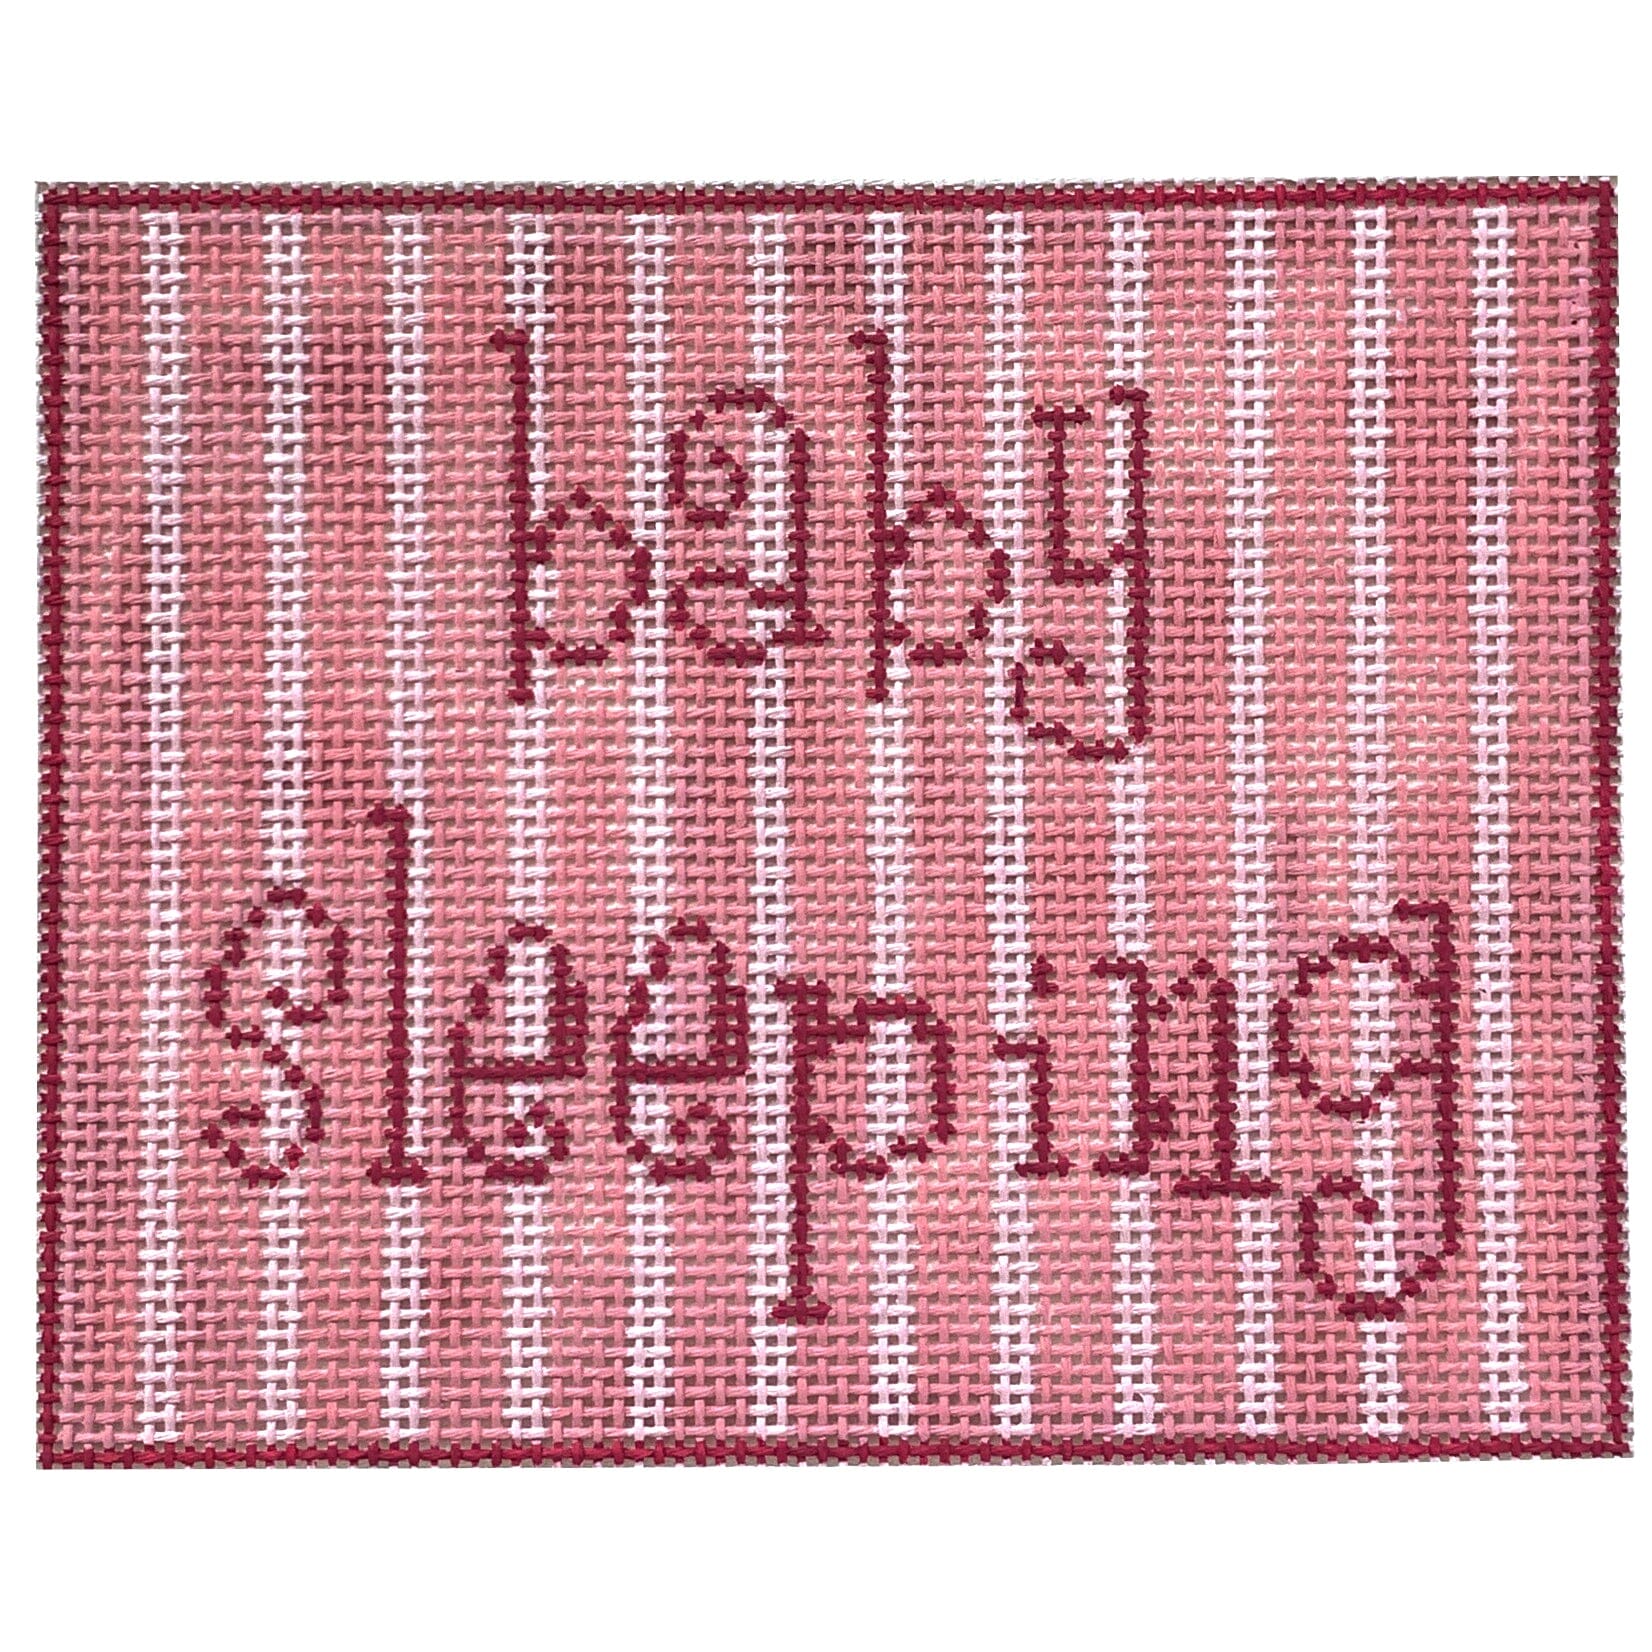 Baby Sleeping in Pink Painted Canvas All About Stitching/The Collection Design 